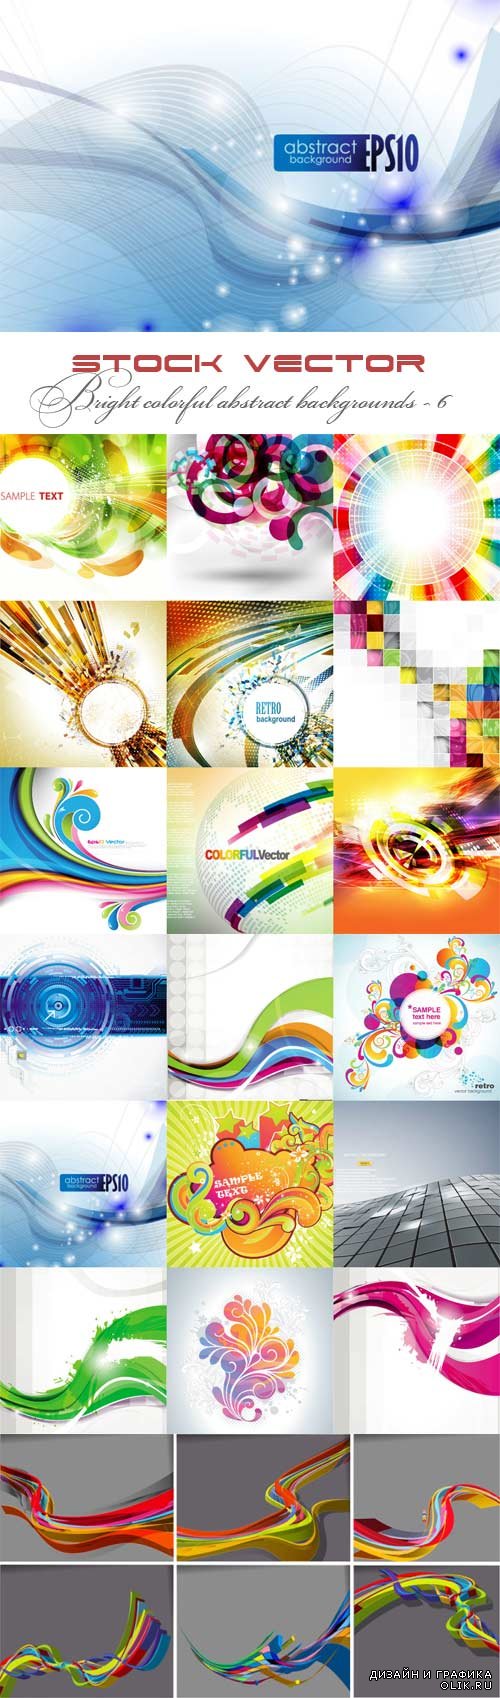 Bright colorful abstract backgrounds vector - 6